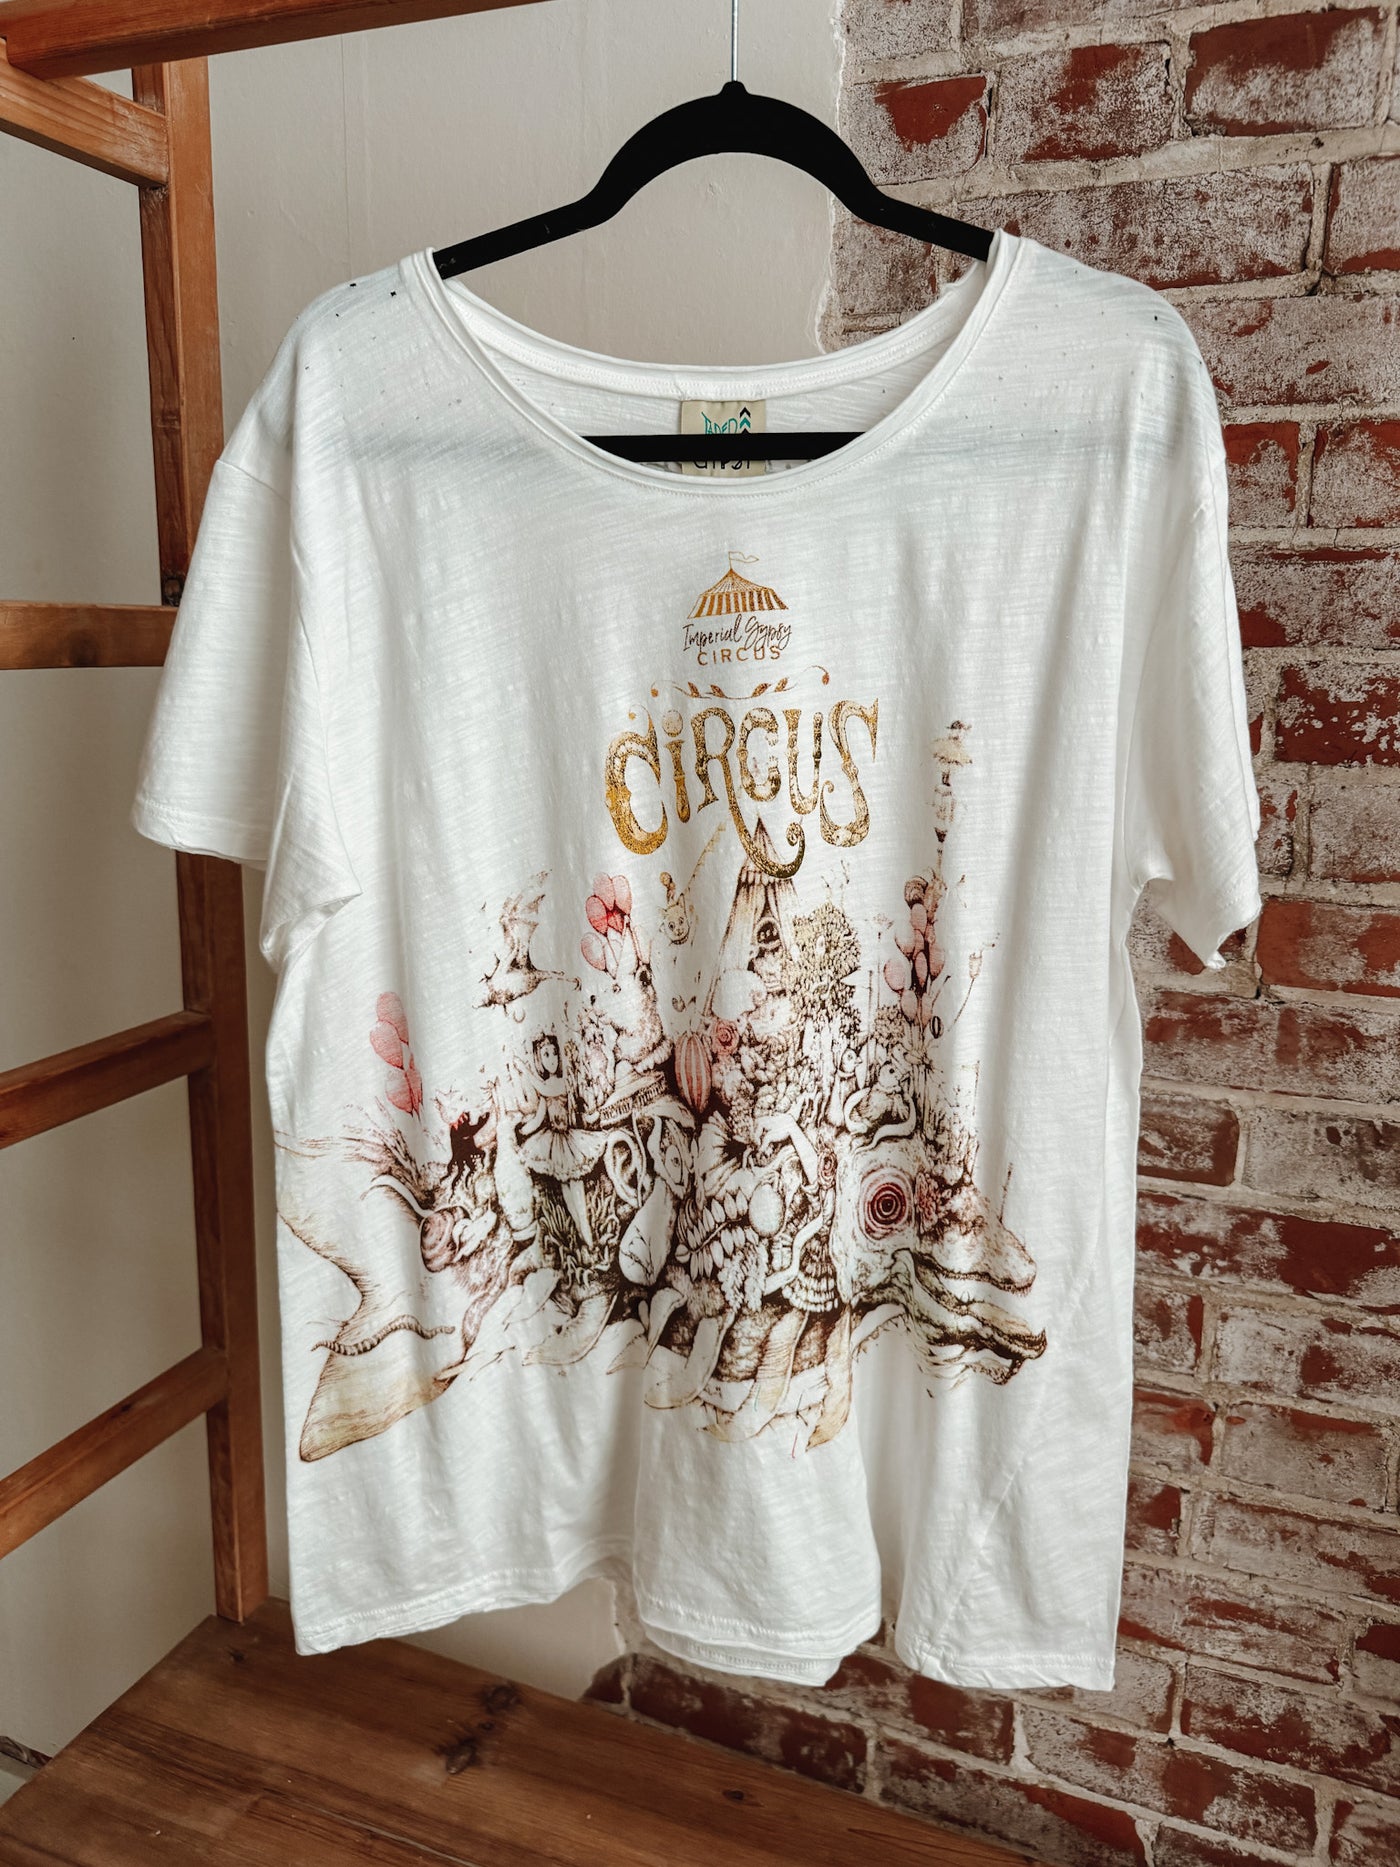 Gypsy Circus Graphic Tee